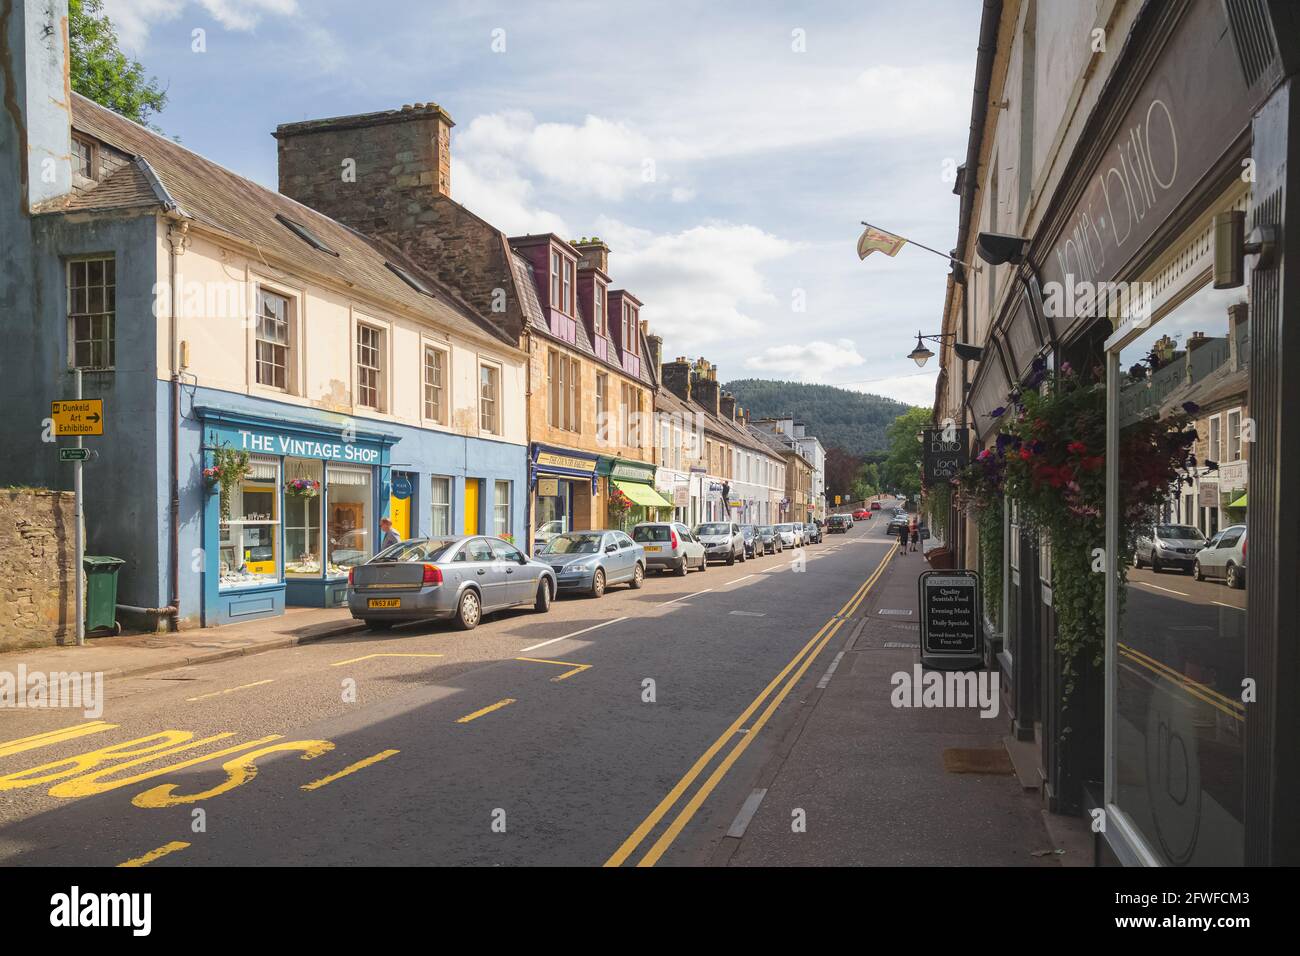 Dunkeld, Scotland - August 15 2016: The quaint main shopping high street of the Scottish town and village of Dunkeld and Birnam in Perth and Kinross. Stock Photo